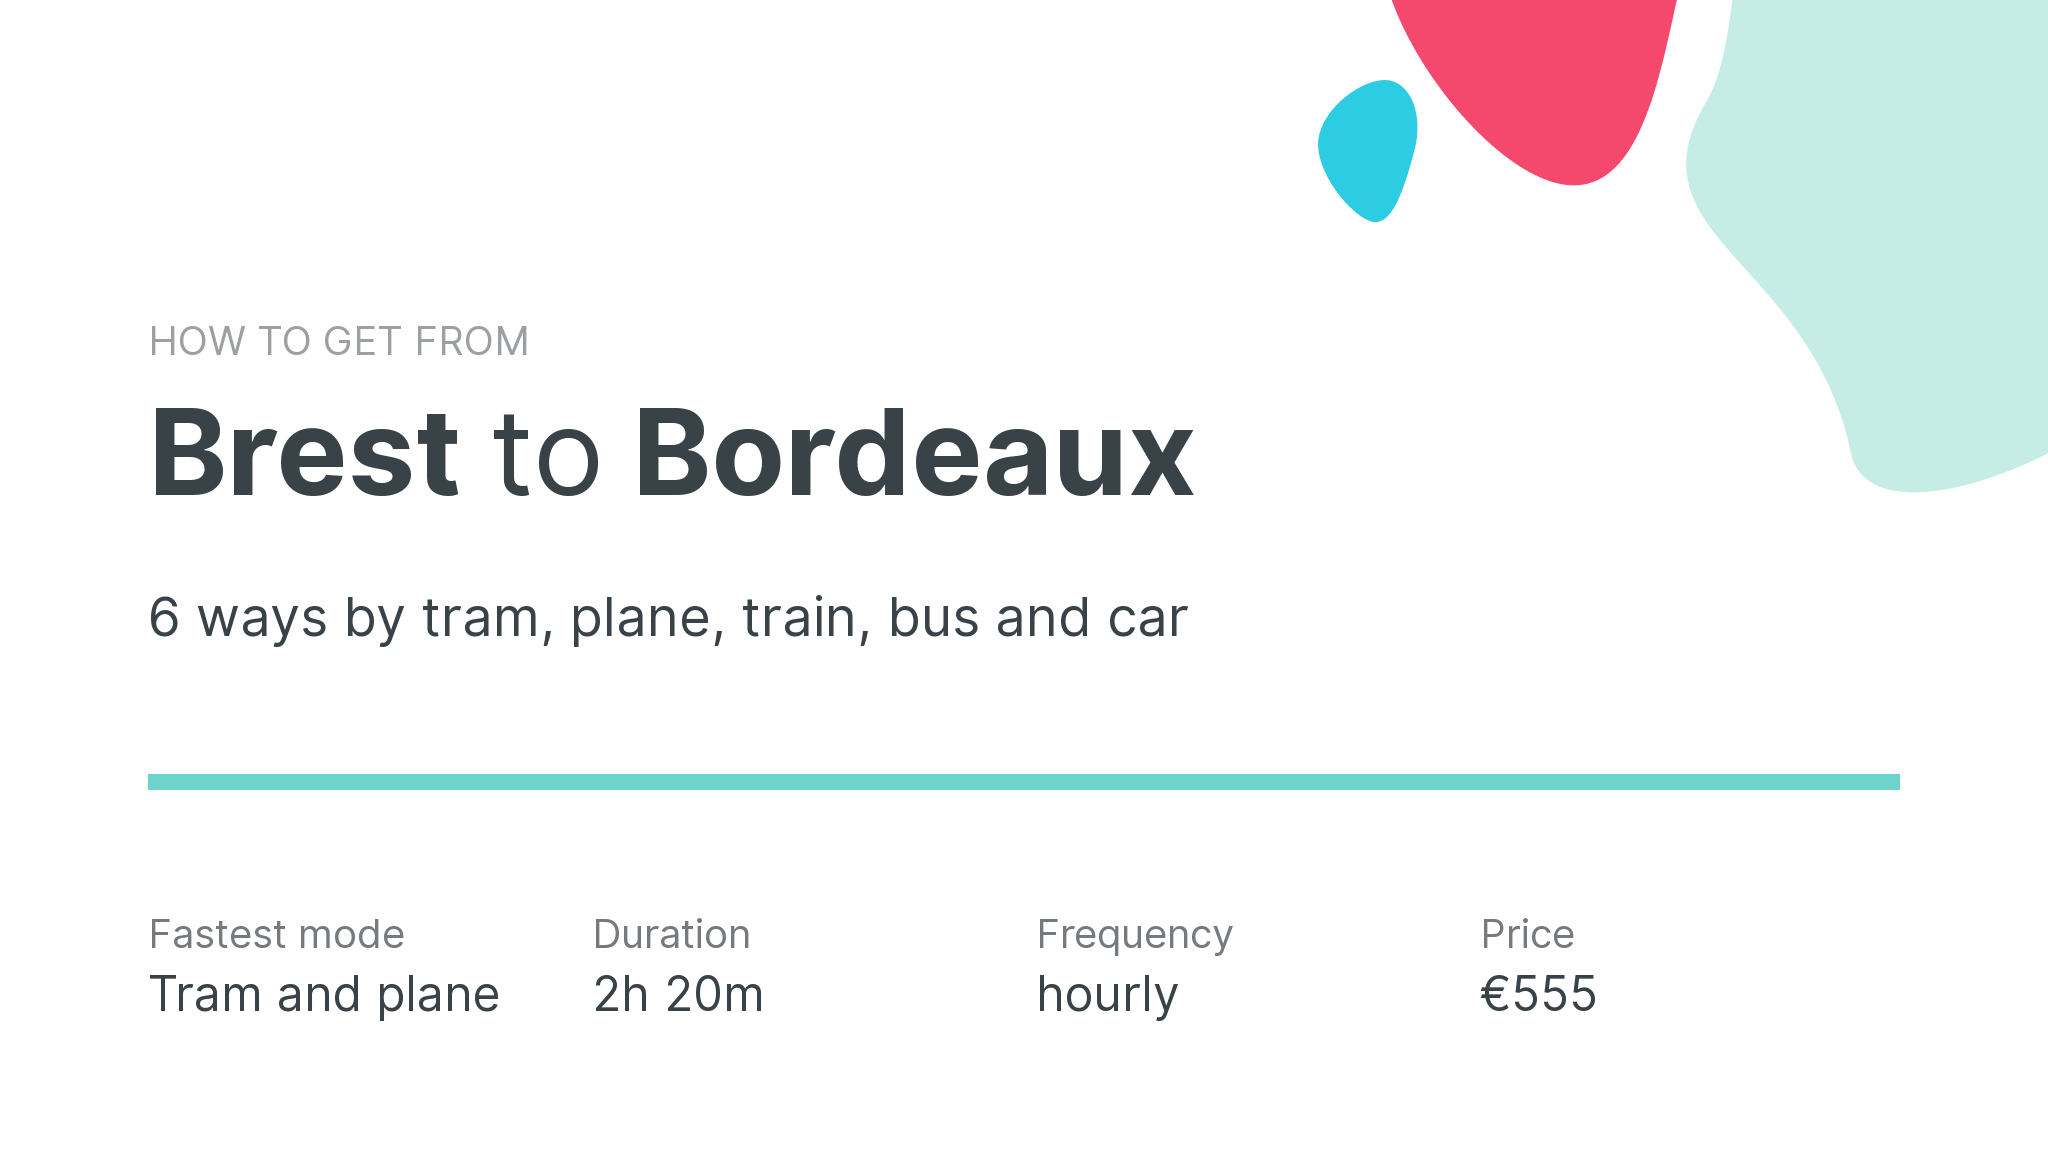 How do I get from Brest to Bordeaux